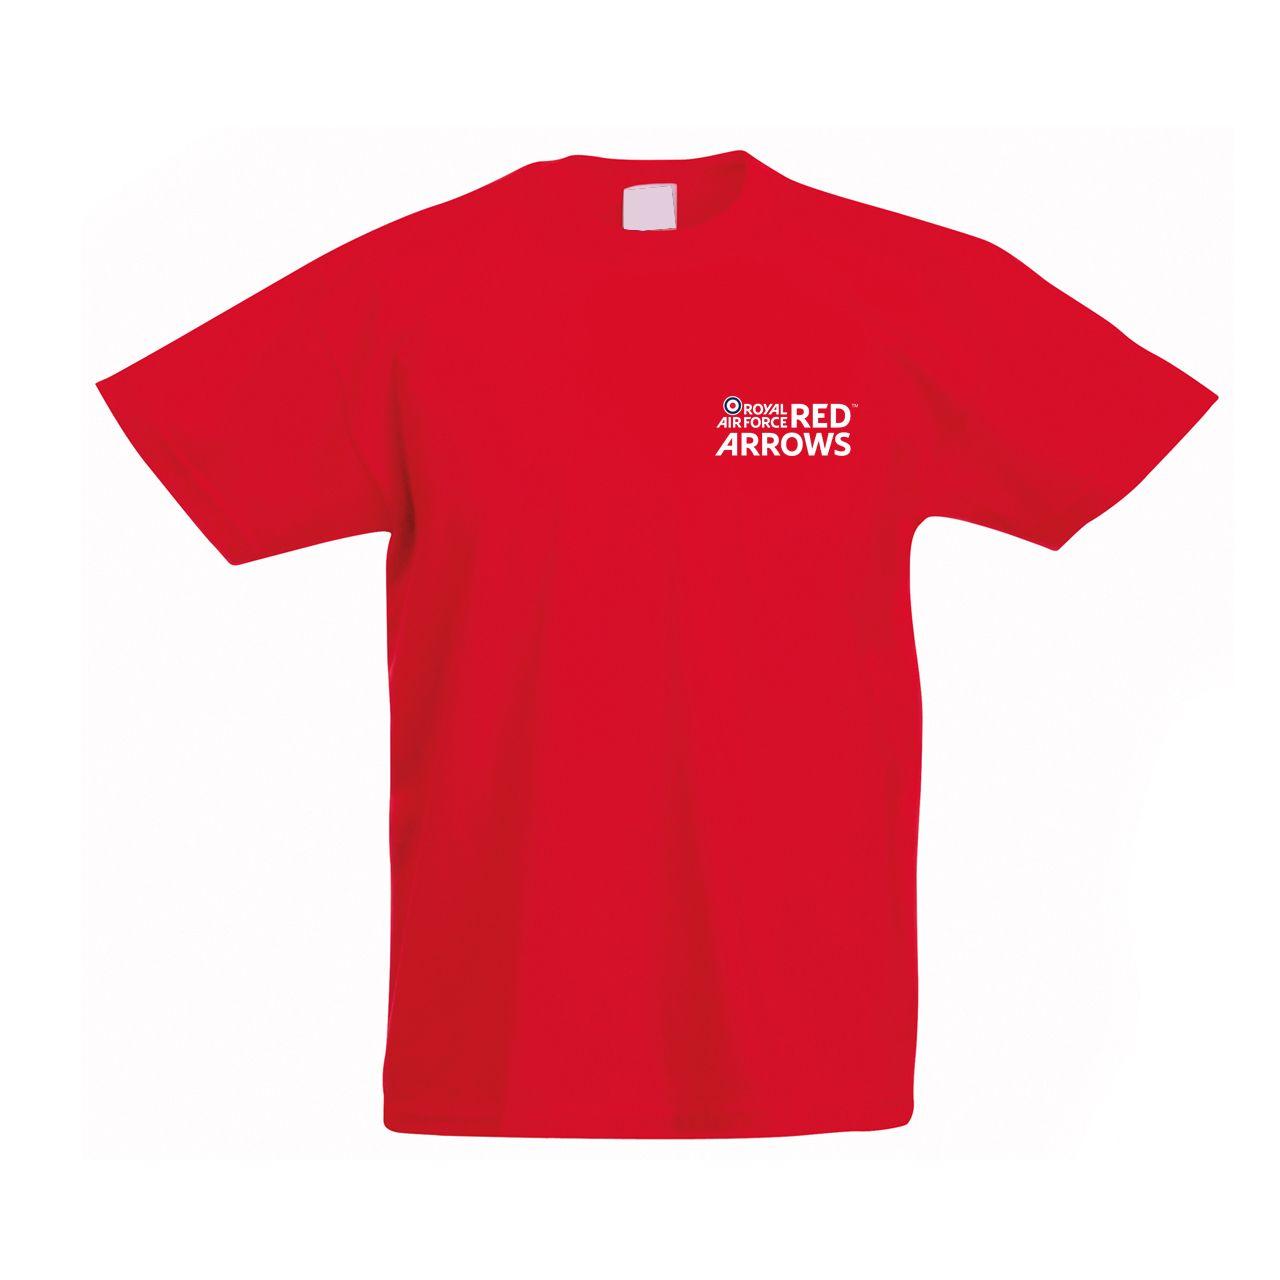 Red Arrow Looking Logo - Official RAF Red Arrows Logo Kids T-Shirt